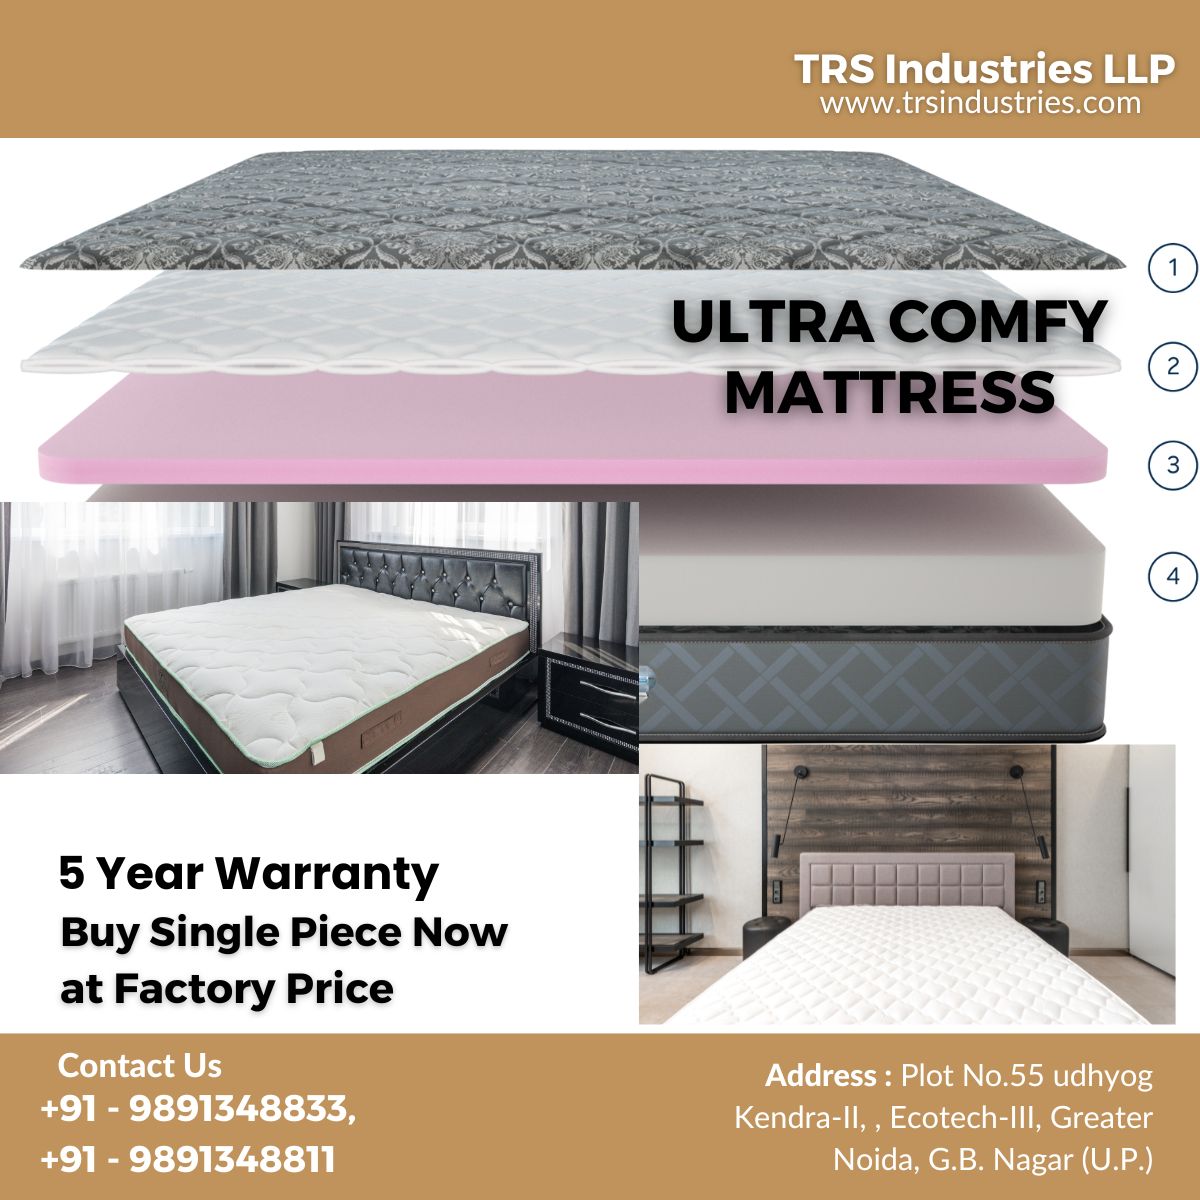 Now TRS Industries are dealing with Top Quality Mattresses too. Your comfort is our first priority. You can buy Single Product Directly from us at factory Price with 5 Year warranty.
.
.
.
#mattress #wholesalemattresses #mattressmanufacturer #mattresses #mattressshopping